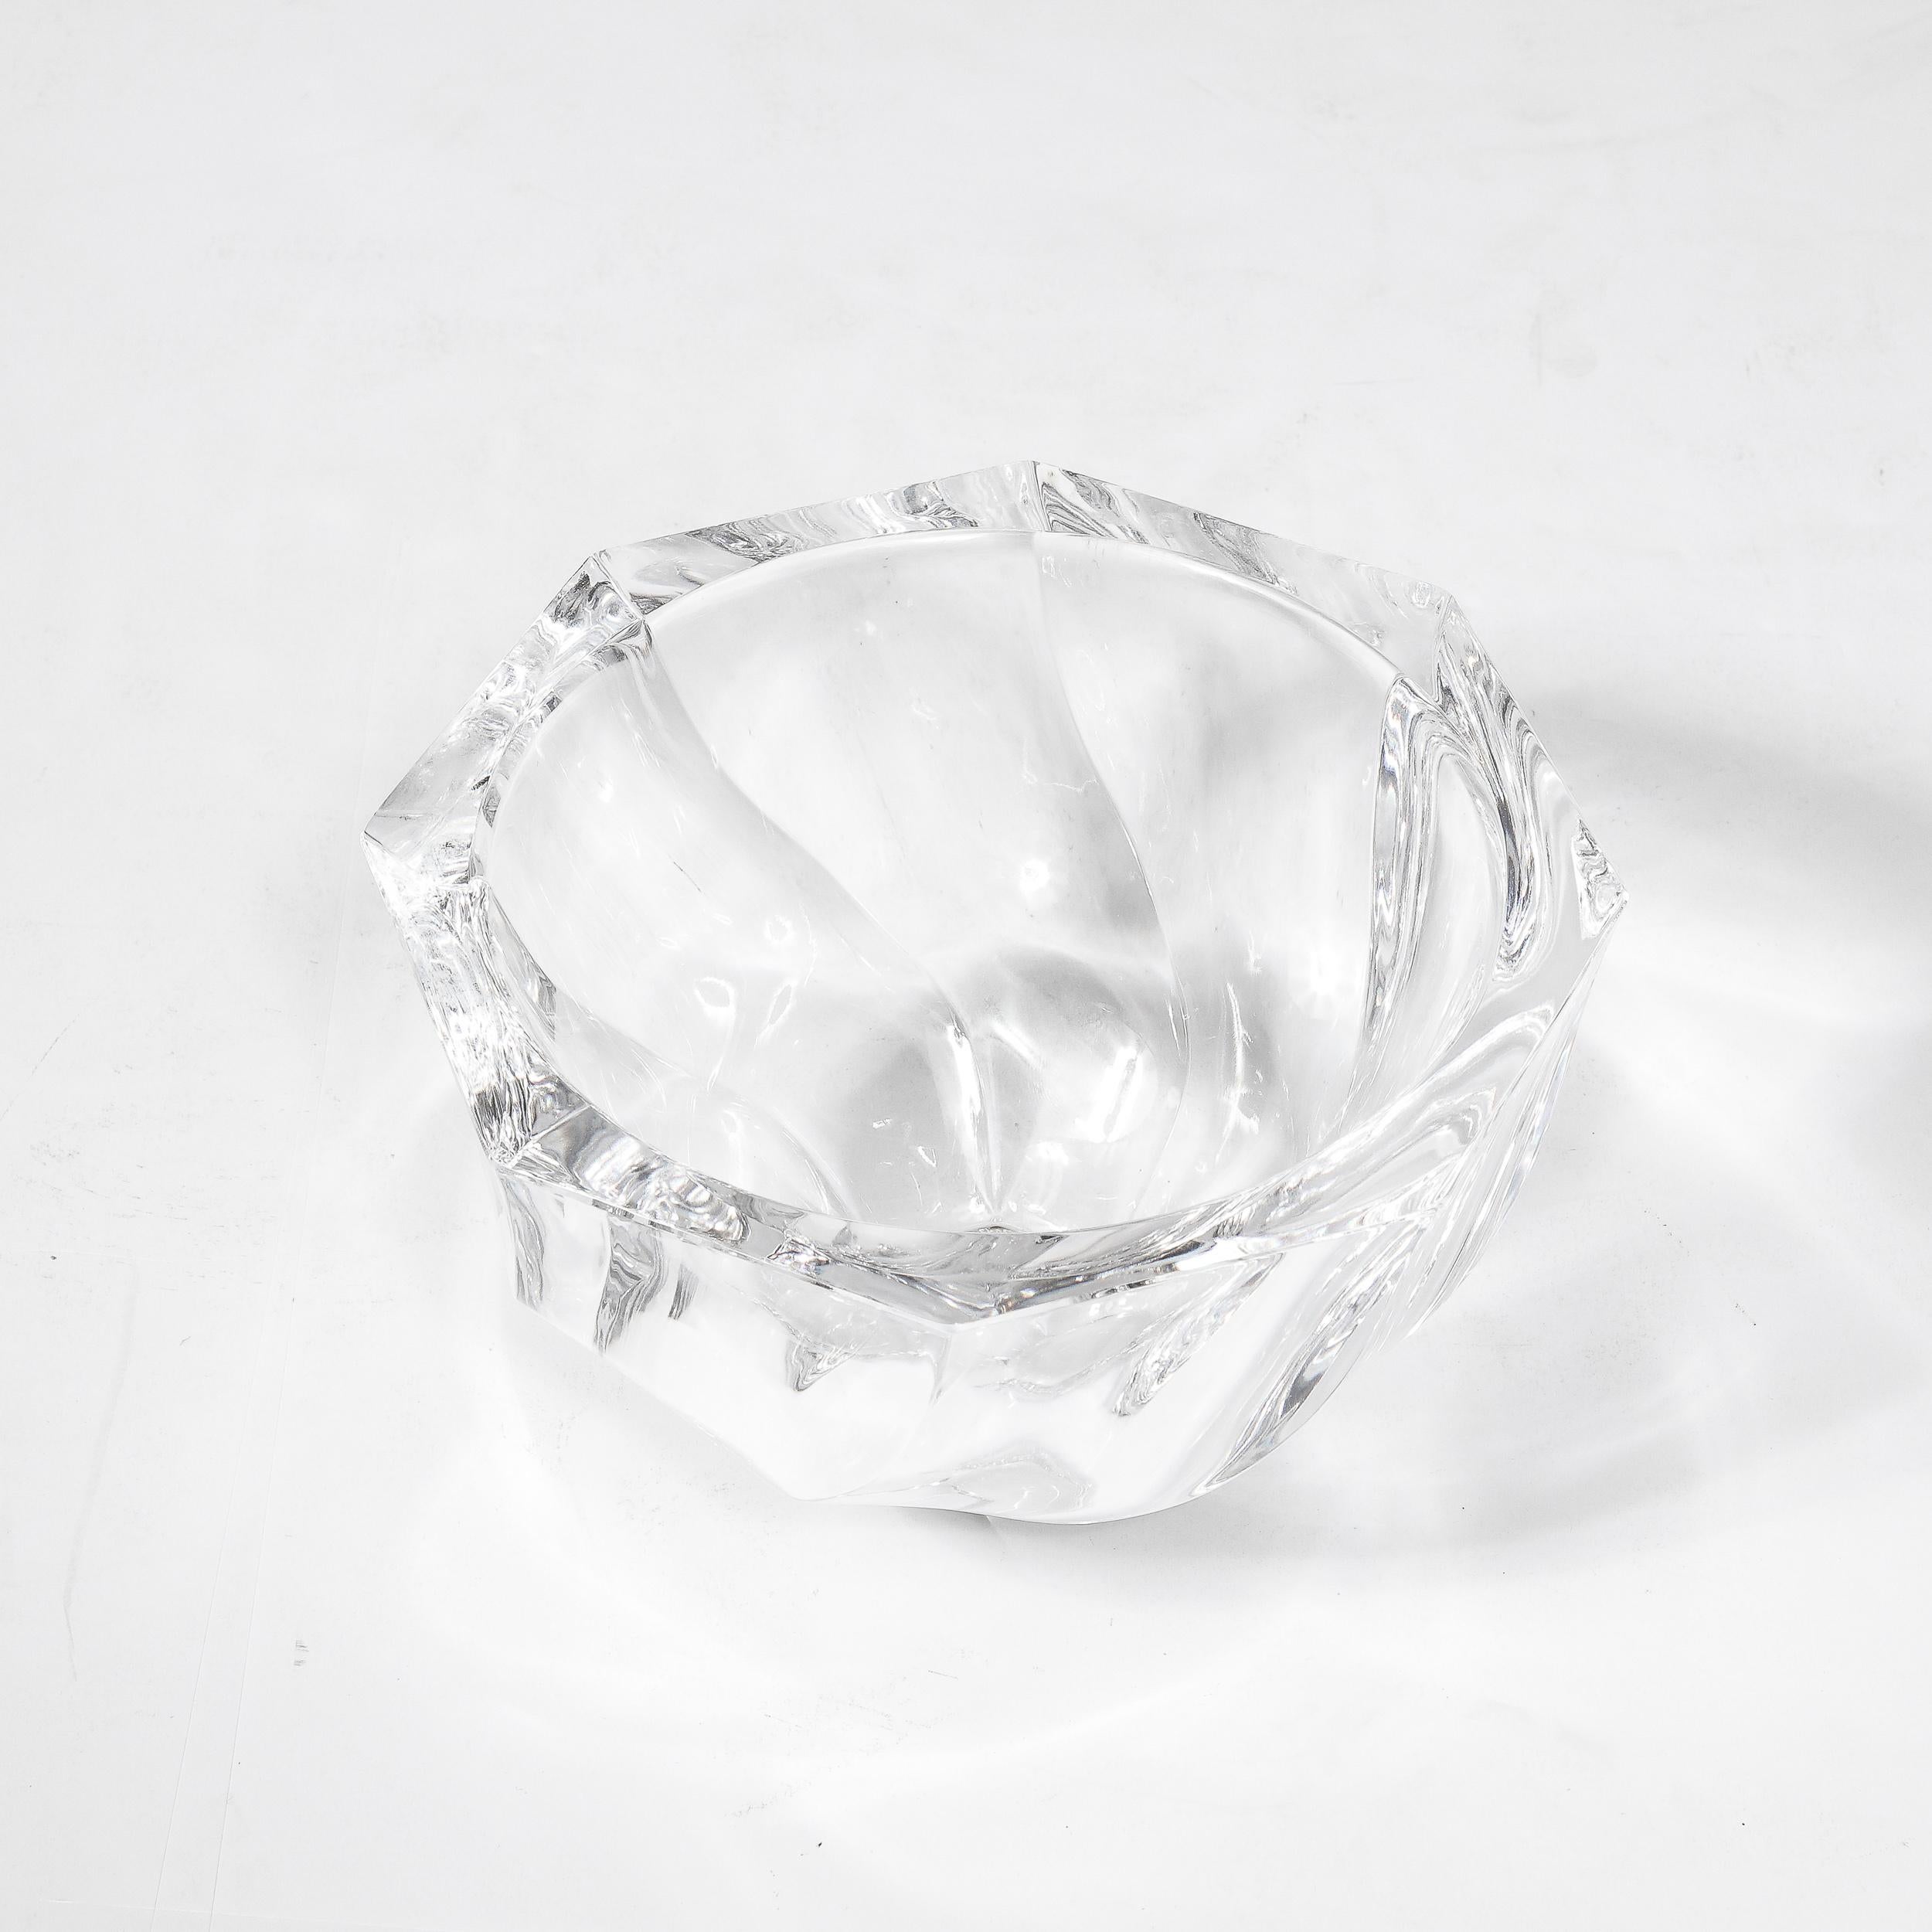 20th Century Mid-Century Modernist Spiral Form Crystal Bowl by Orrefors For Sale